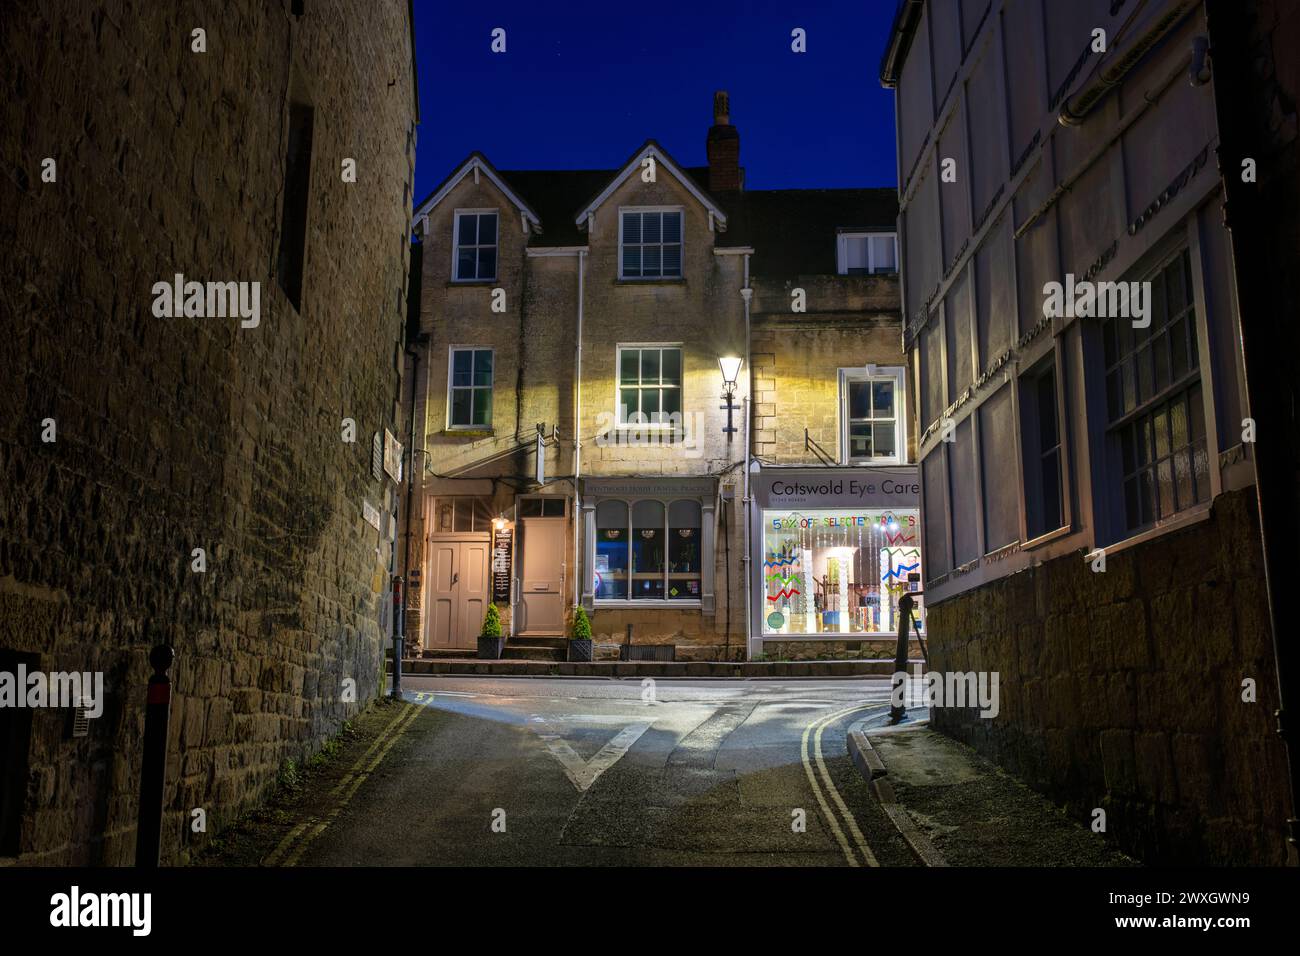 Looking up Castle street onto the high street just before dawn. Winchcombe, Cotswolds, Gloucestershire, England Stock Photo